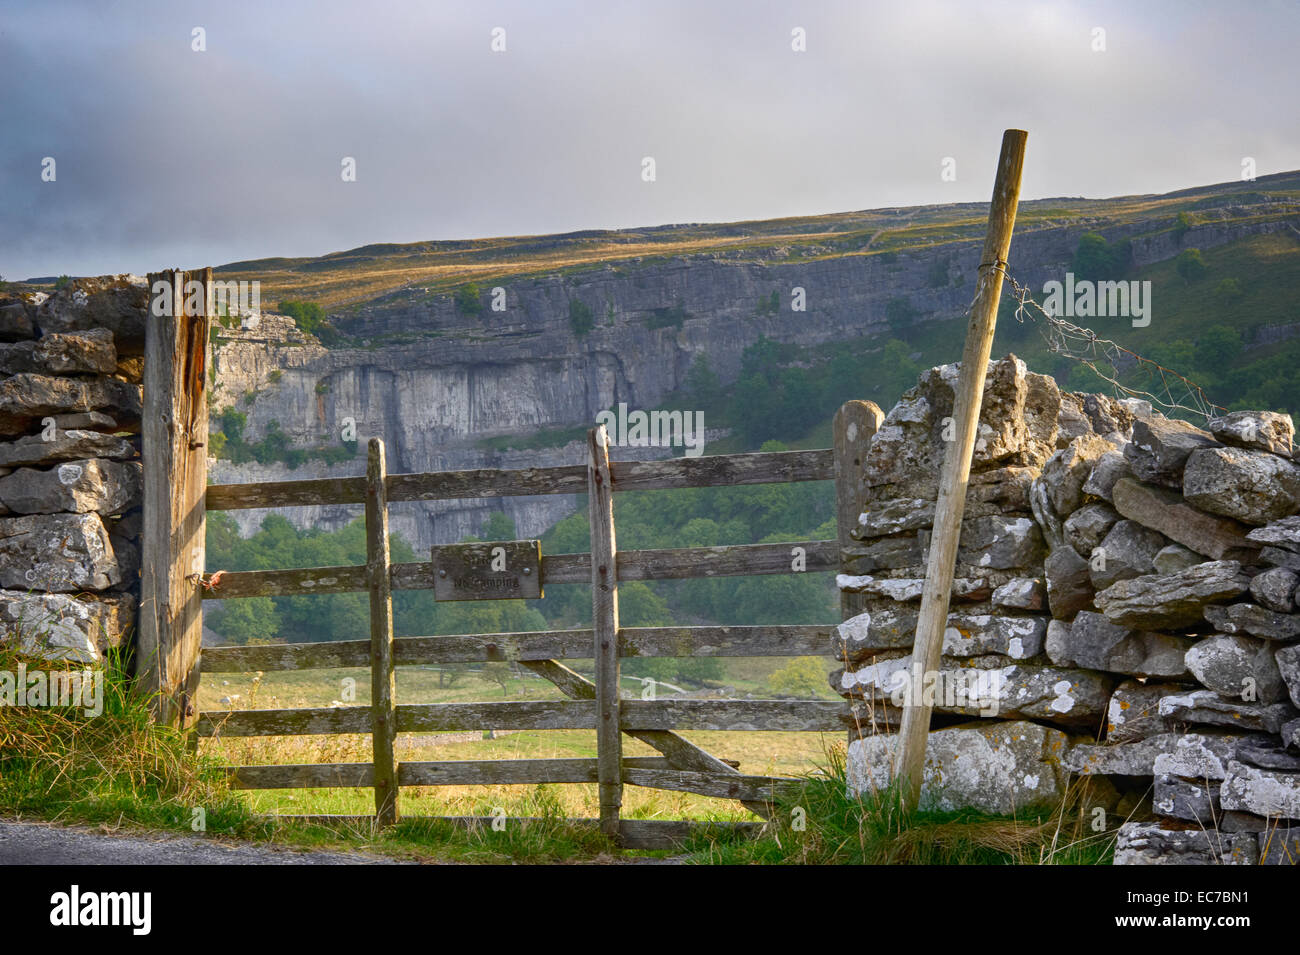 Gateway into National Trust property overlooking Malham Cove in North Yorkshire, England Stock Photo